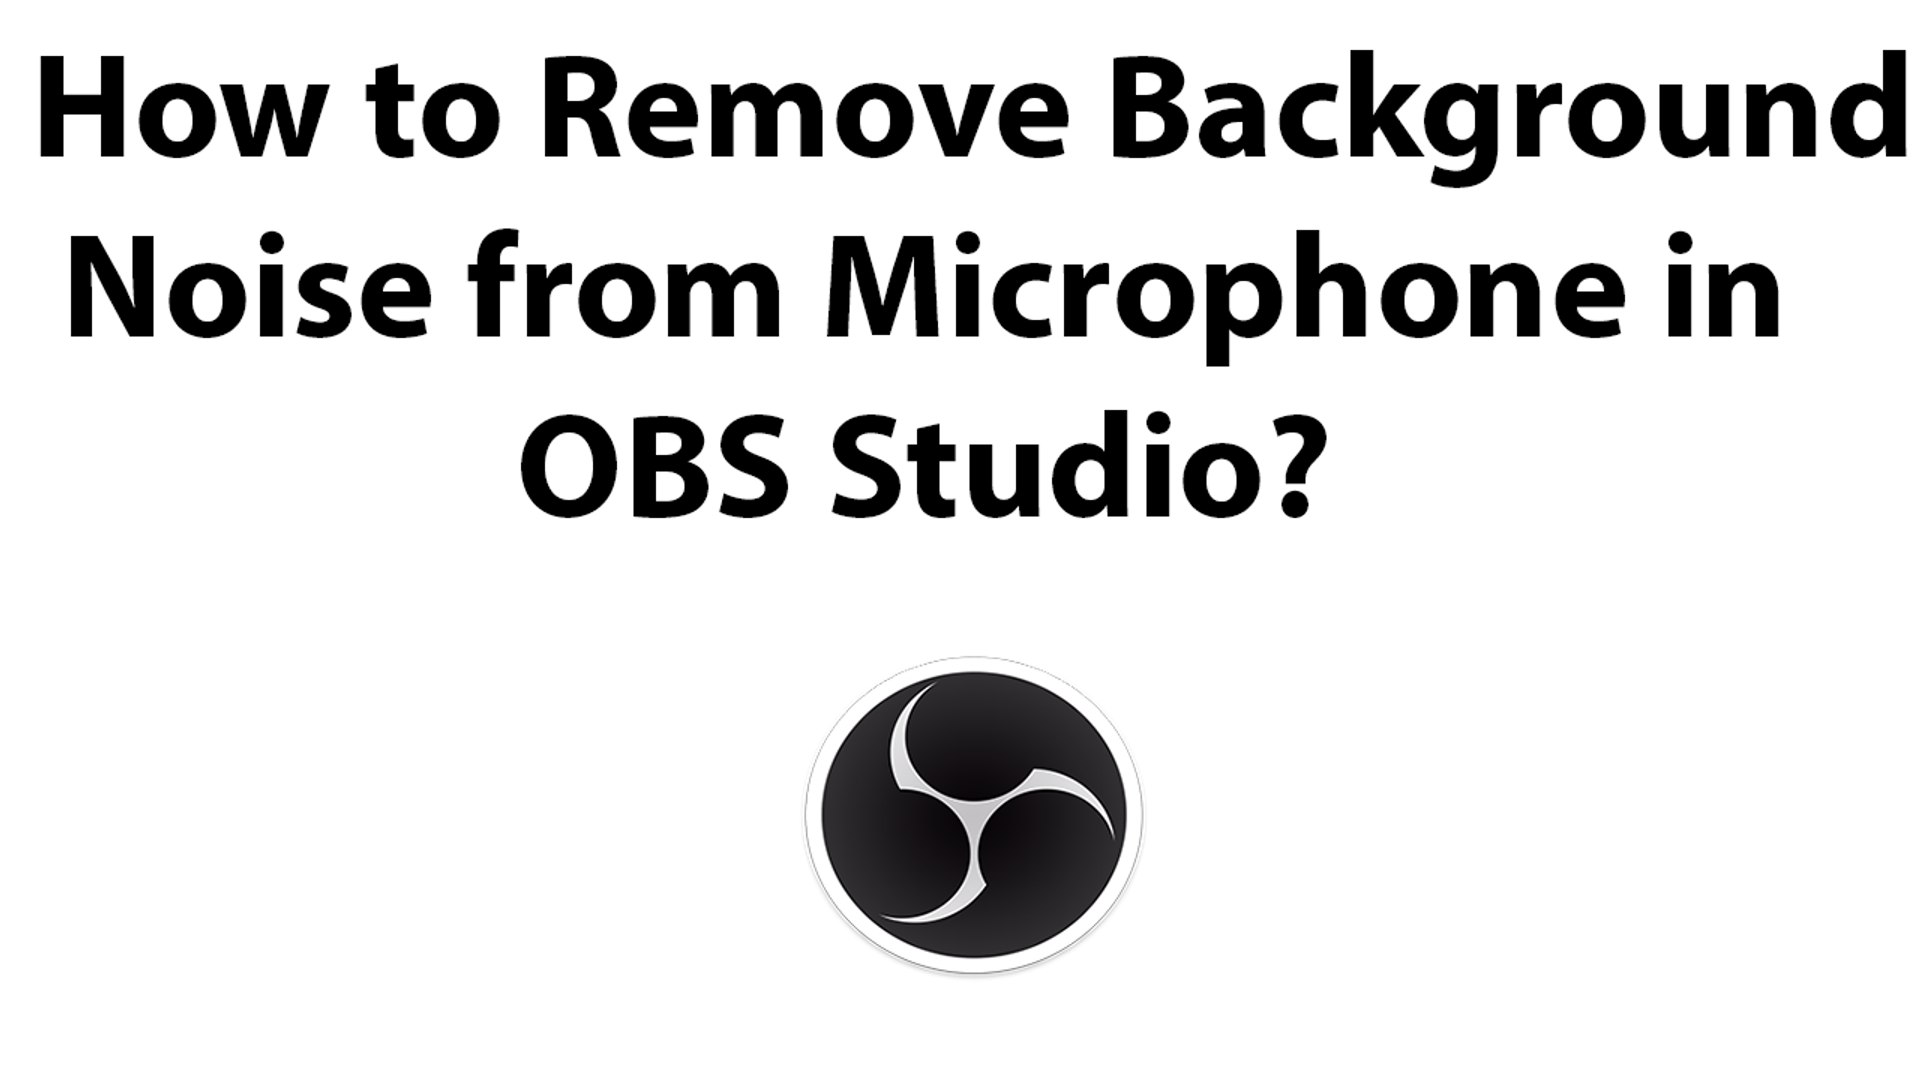 How To Remove Background Noise From Microphone In Obs Studio - how to remove background noise from microphone in obs studio video dailymotion